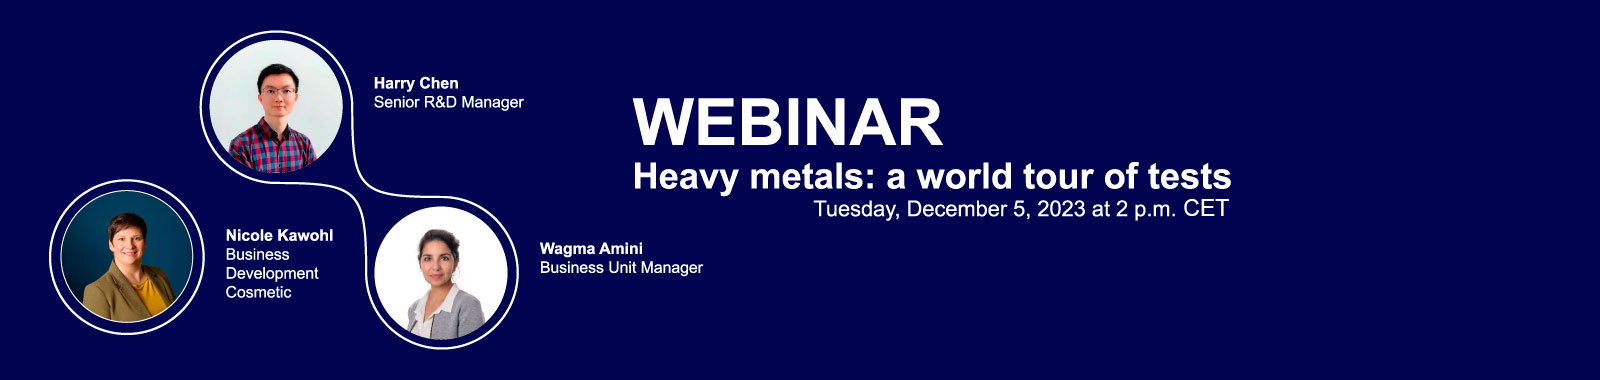 Webinar - Heavy metals: a world tour of tests